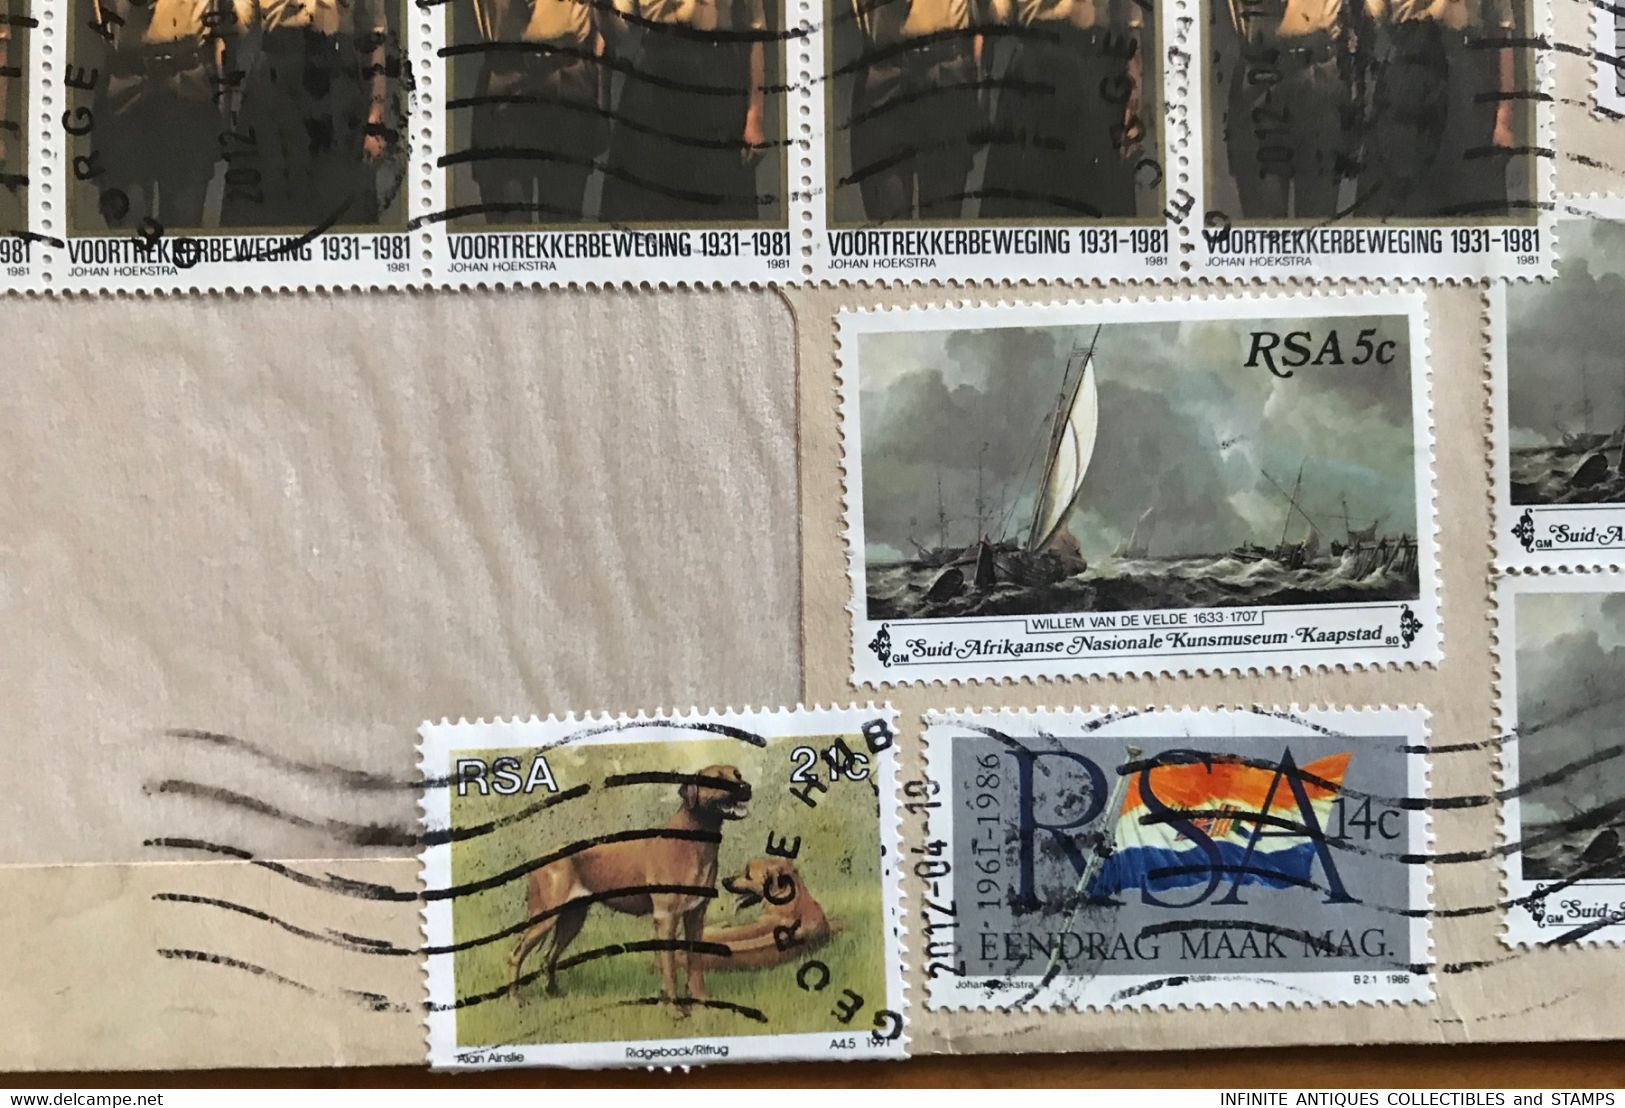 SOUTH AFRICA=LETTER=2012=GEORGE POSTMARK=CDS=CAPE PROVINCE=Mixed Stamps On Cover=BOYSCOUTS=DOG=FLAG=SAILING SHIP=BEADS - Storia Postale